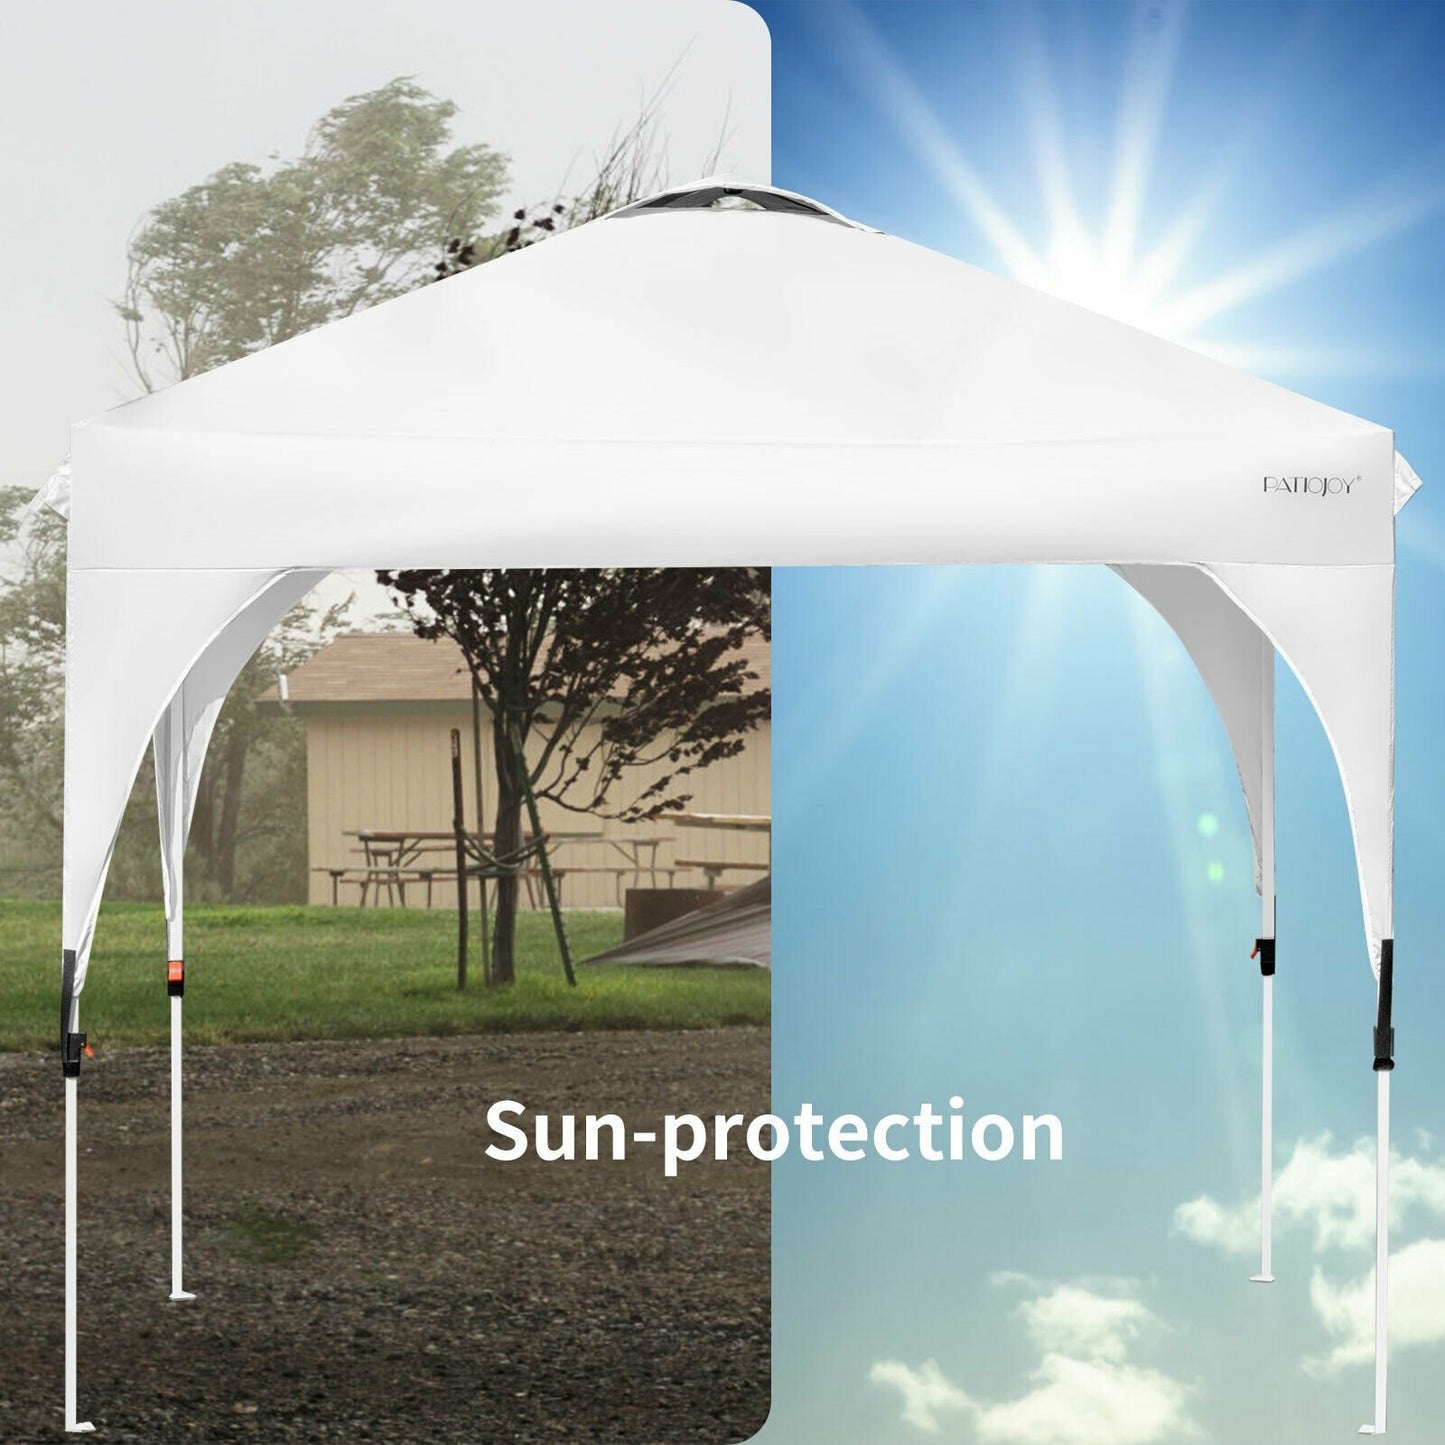 8 Feet x 8 Feet Outdoor Pop Up Tent Canopy Camping Sun Shelter with Roller Bag, White - Gallery Canada